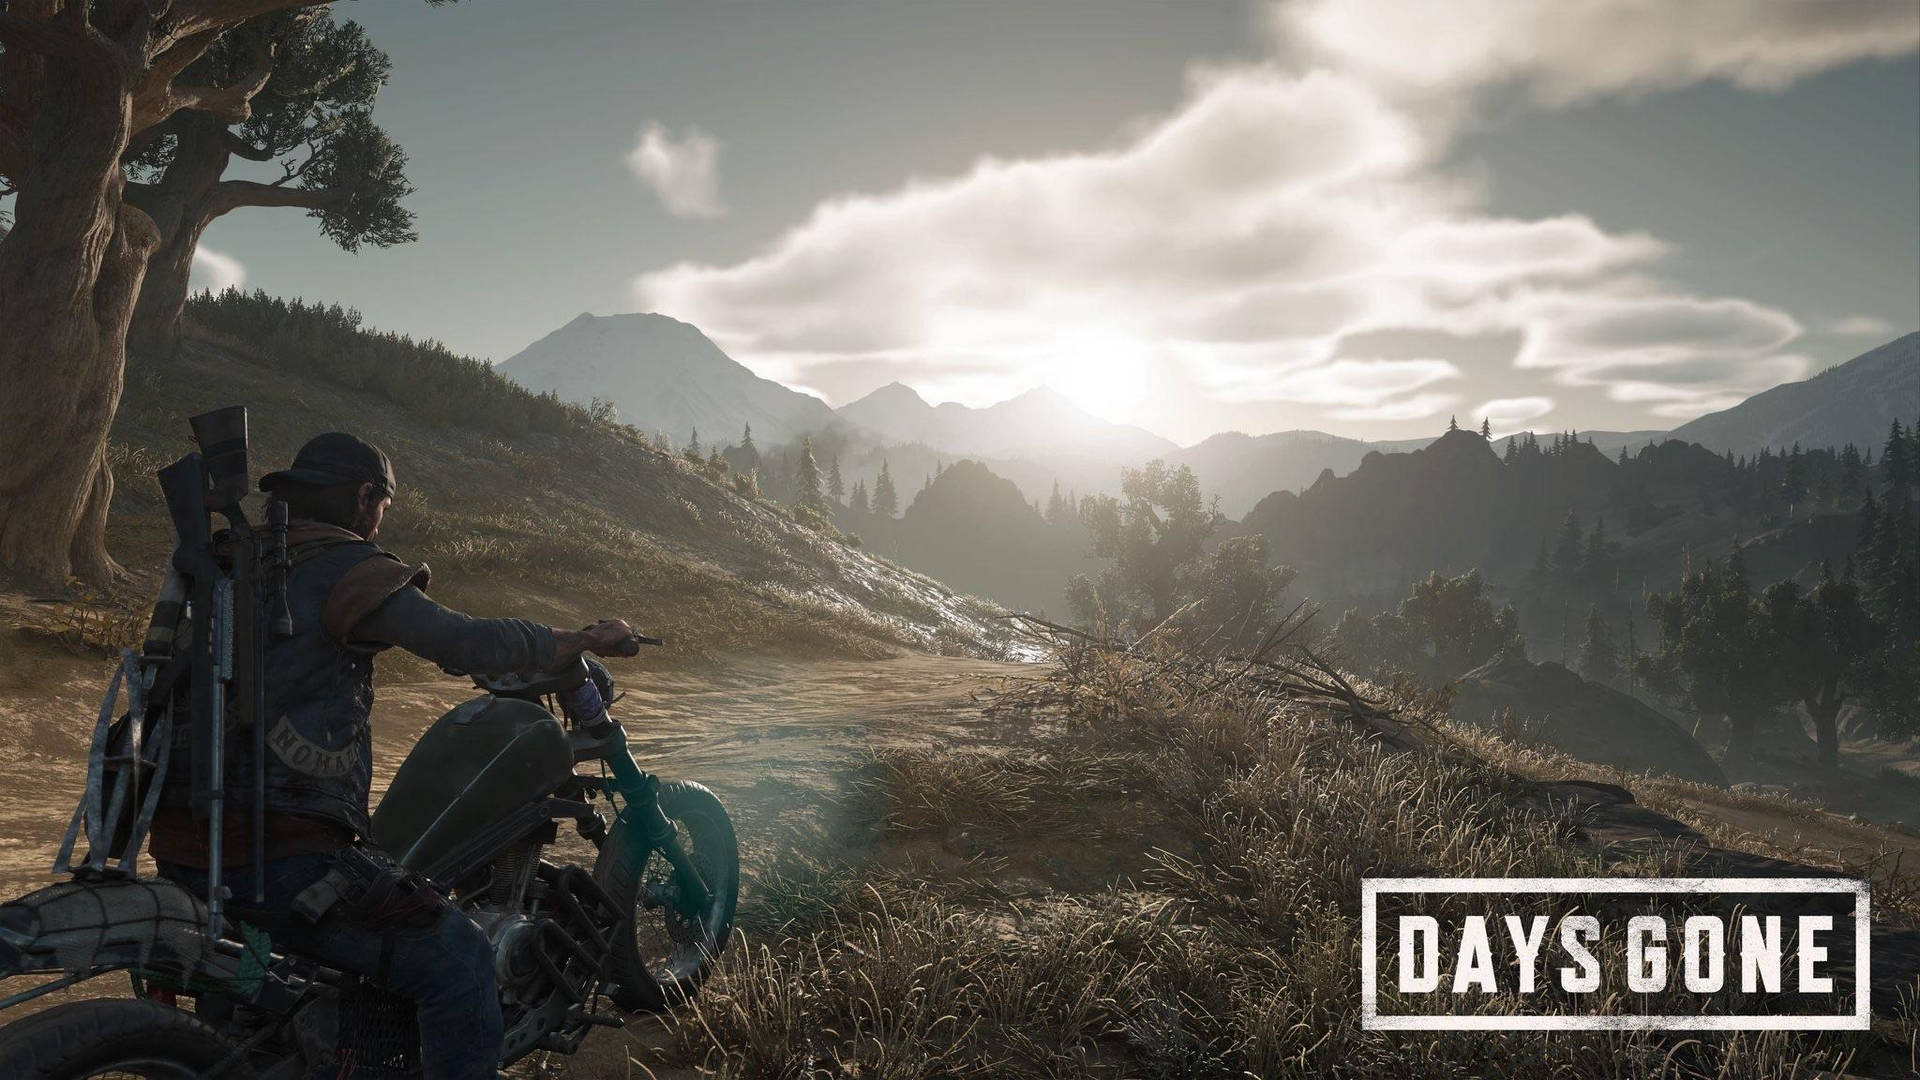 Ride over the mountains with the power of your bike in Days Gone Wallpaper